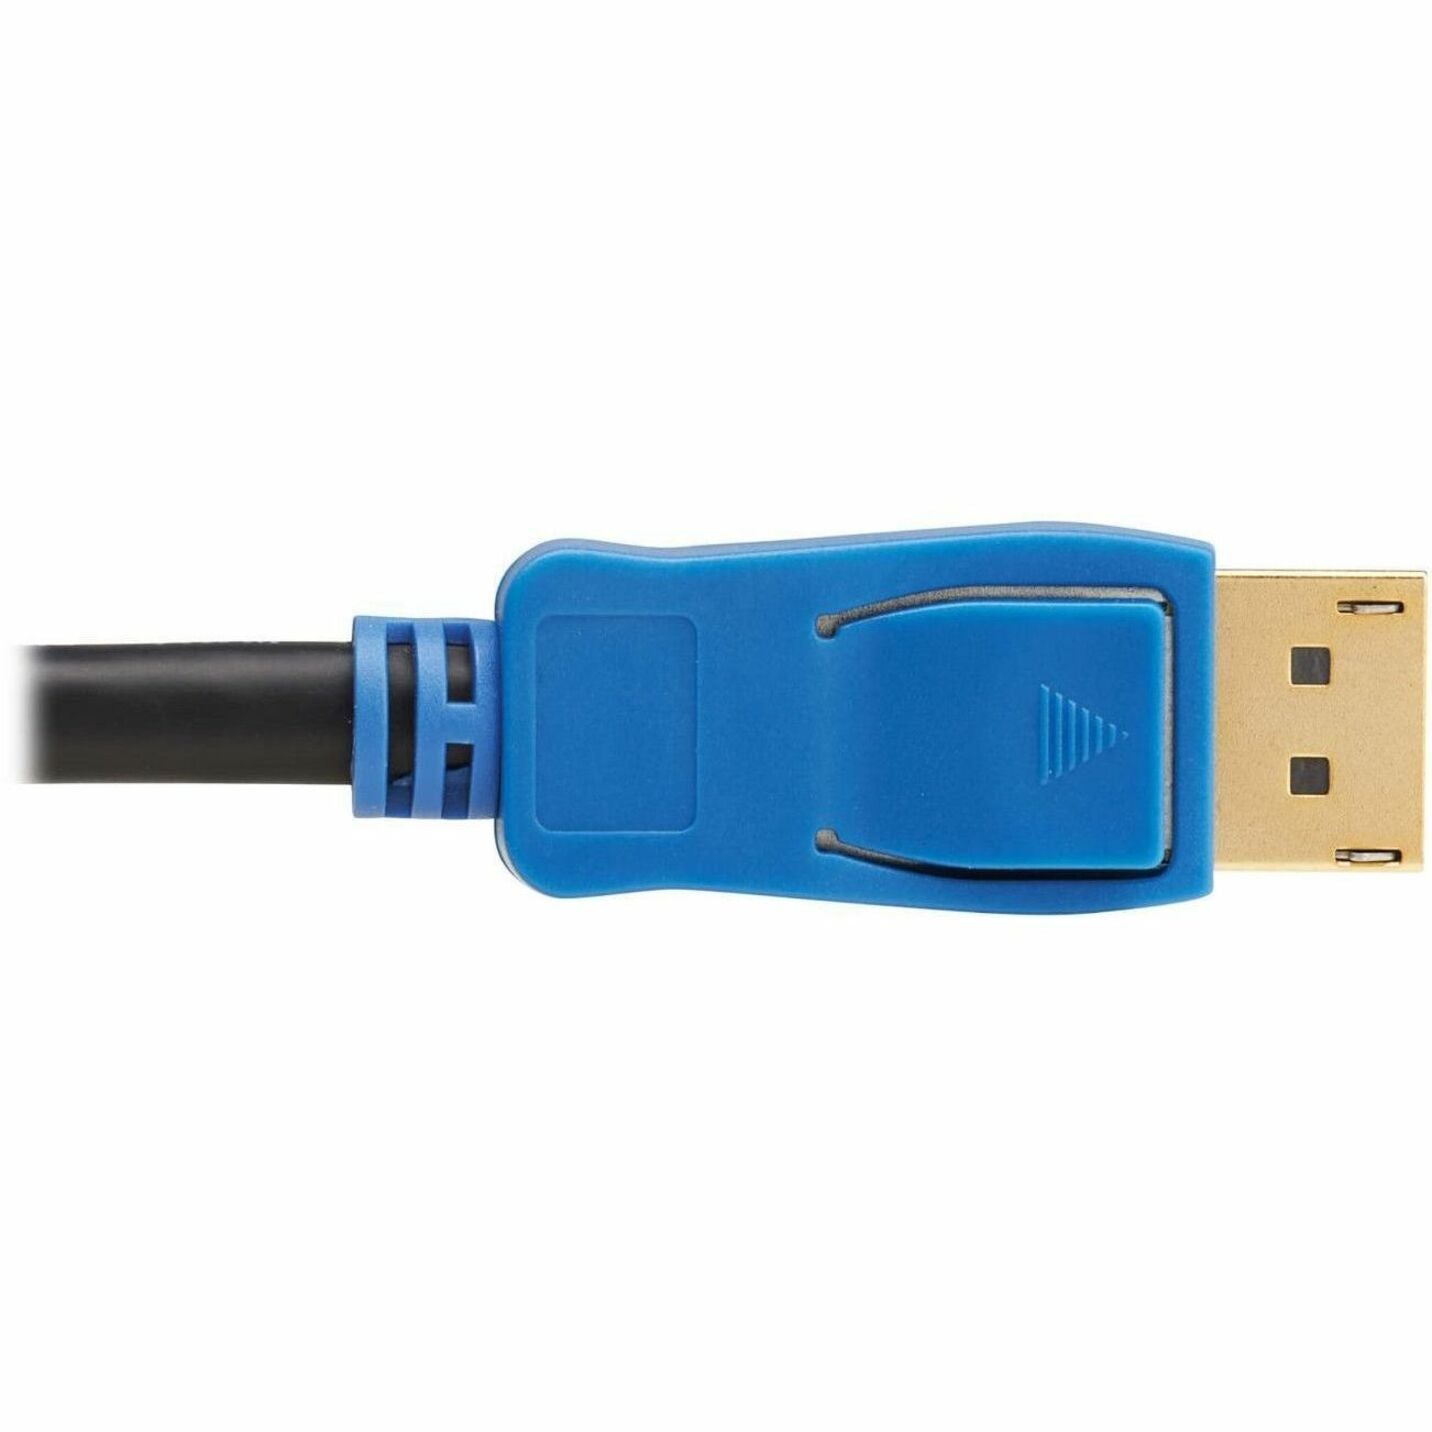 Tripp Lite P579-009-8K6 DisplayPort Extension Audio/Video Cable, 9 ft, Rugged Jacket, Double Shielded, Noise Reducing, EMI/RF Protection